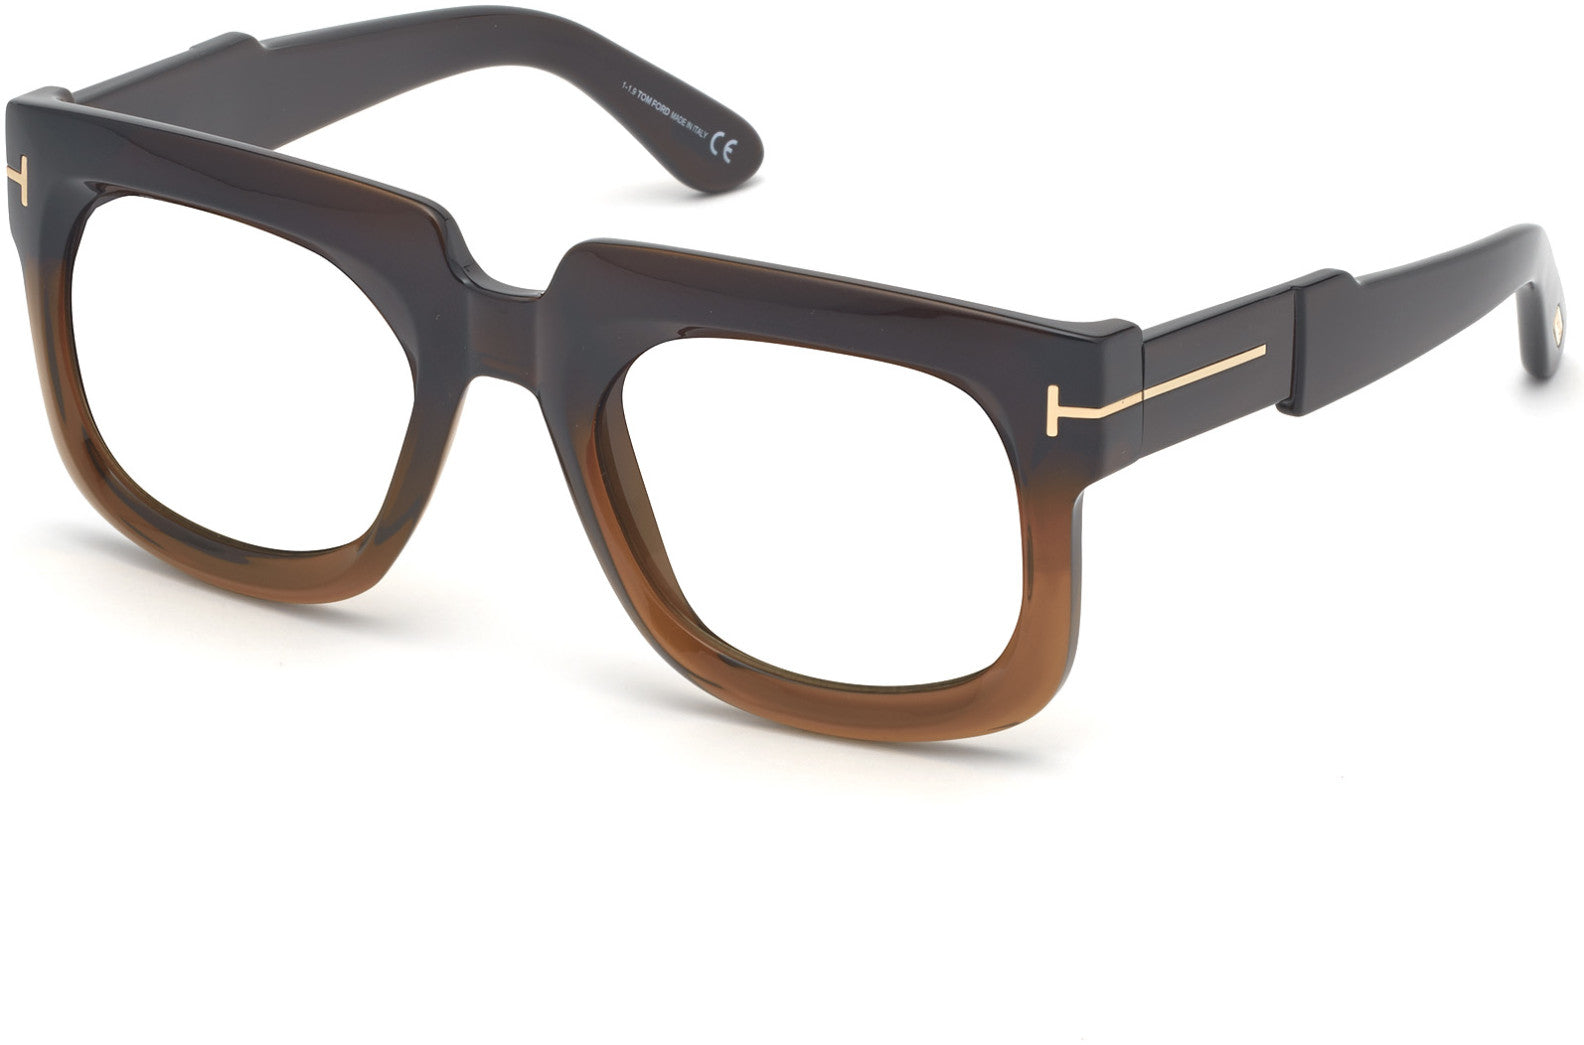 Tom Ford FT0729 Christian Square Sunglasses 048-048 - Transparent Grad. Dark-To-Light Brown/ Clear Lenses - Fw19 Adv Style